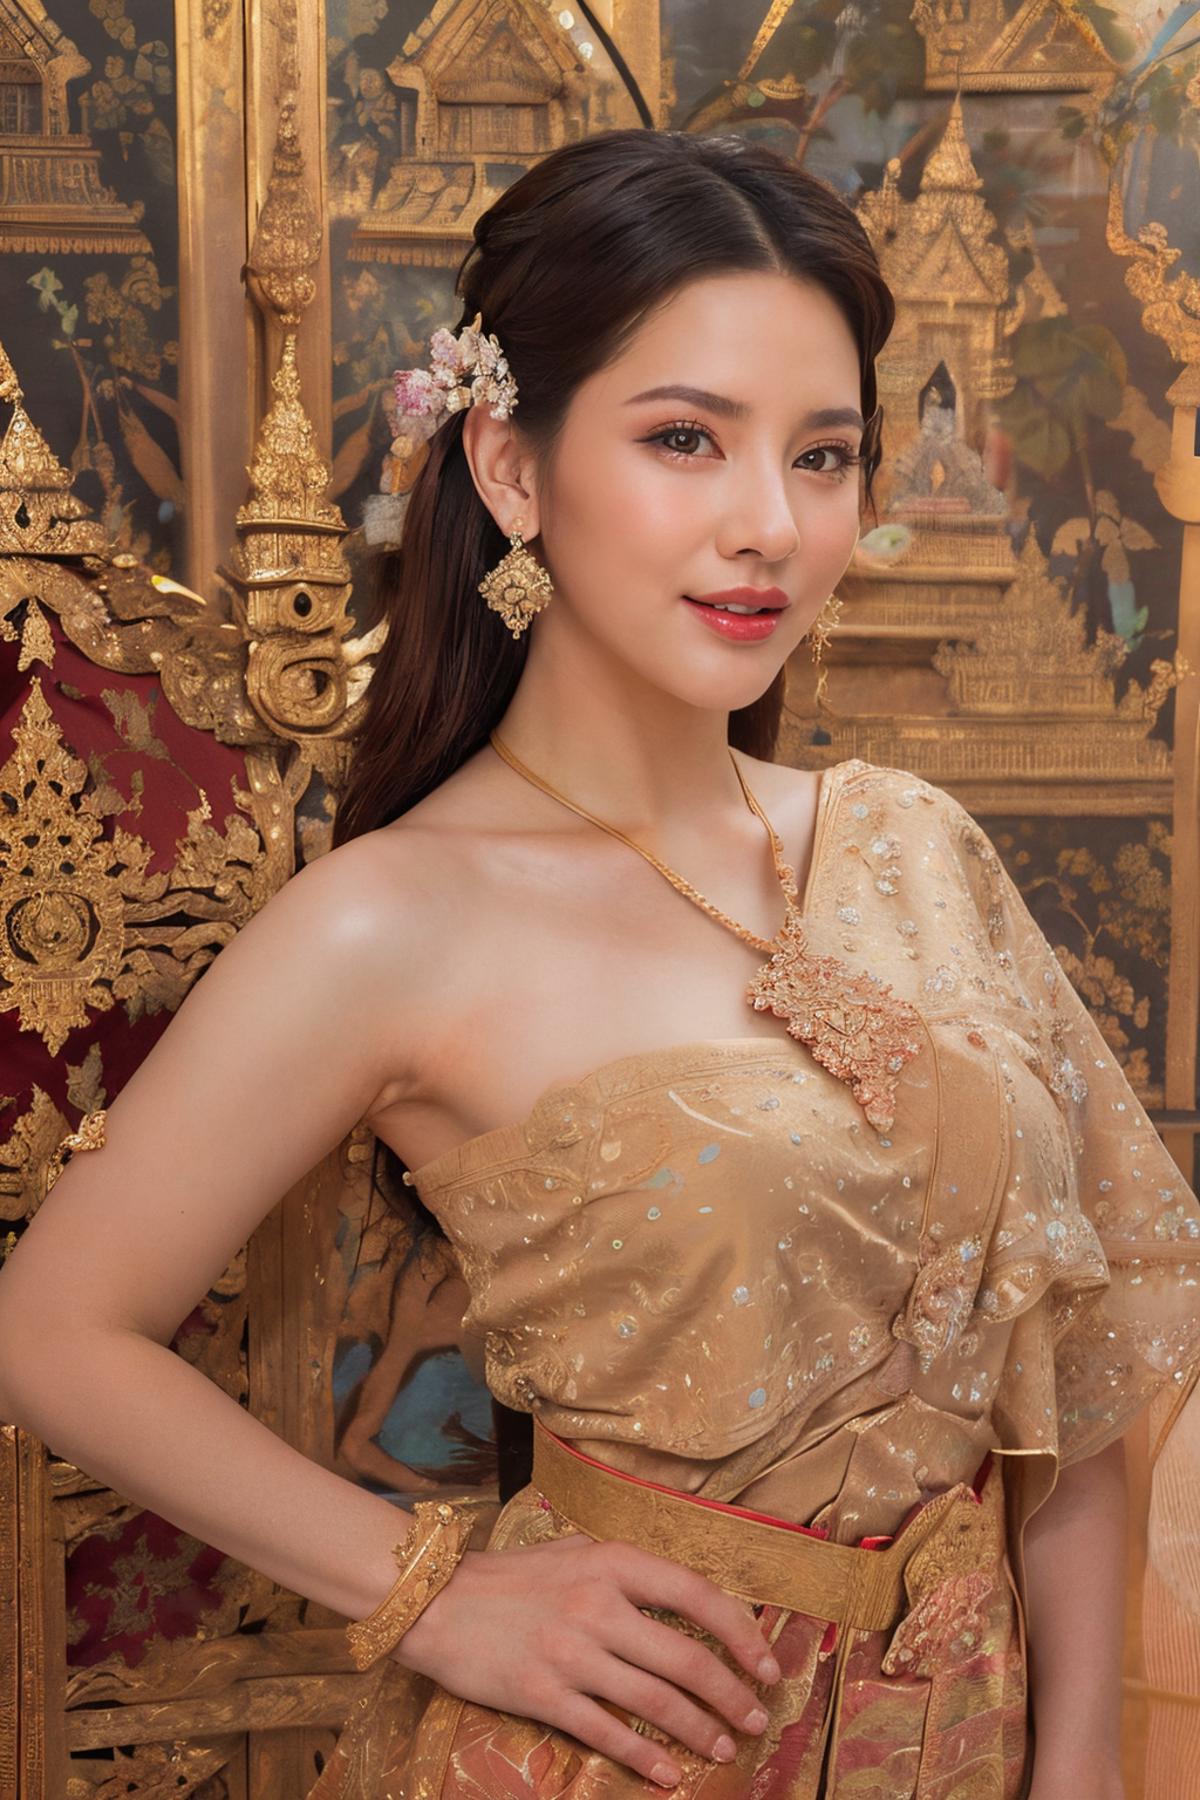 Thailand Tradition Dress image by soulburn777